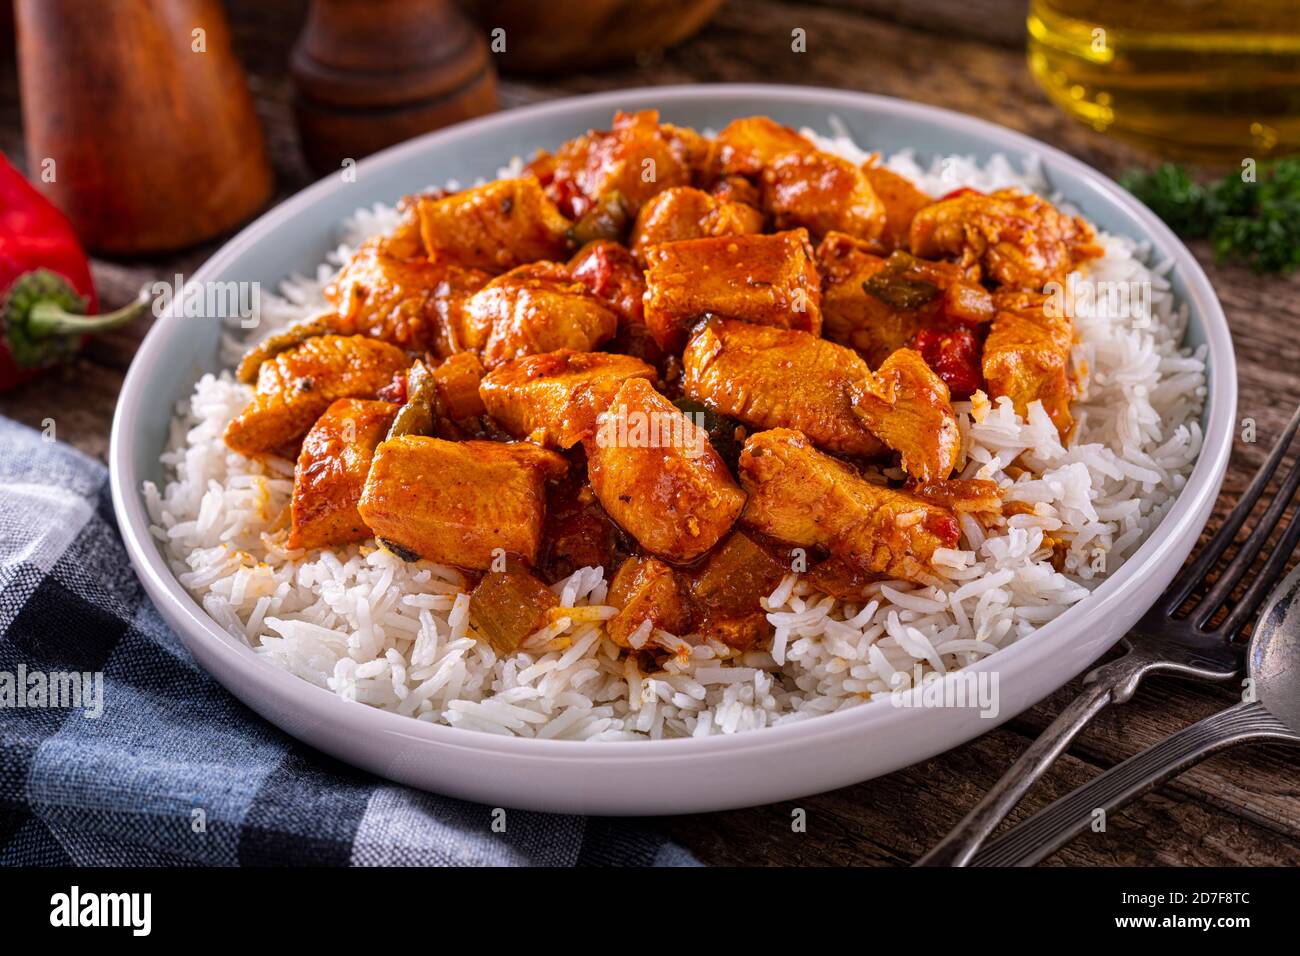 A plate of delicious creole cajun style chicken with white rice. Stock Photo